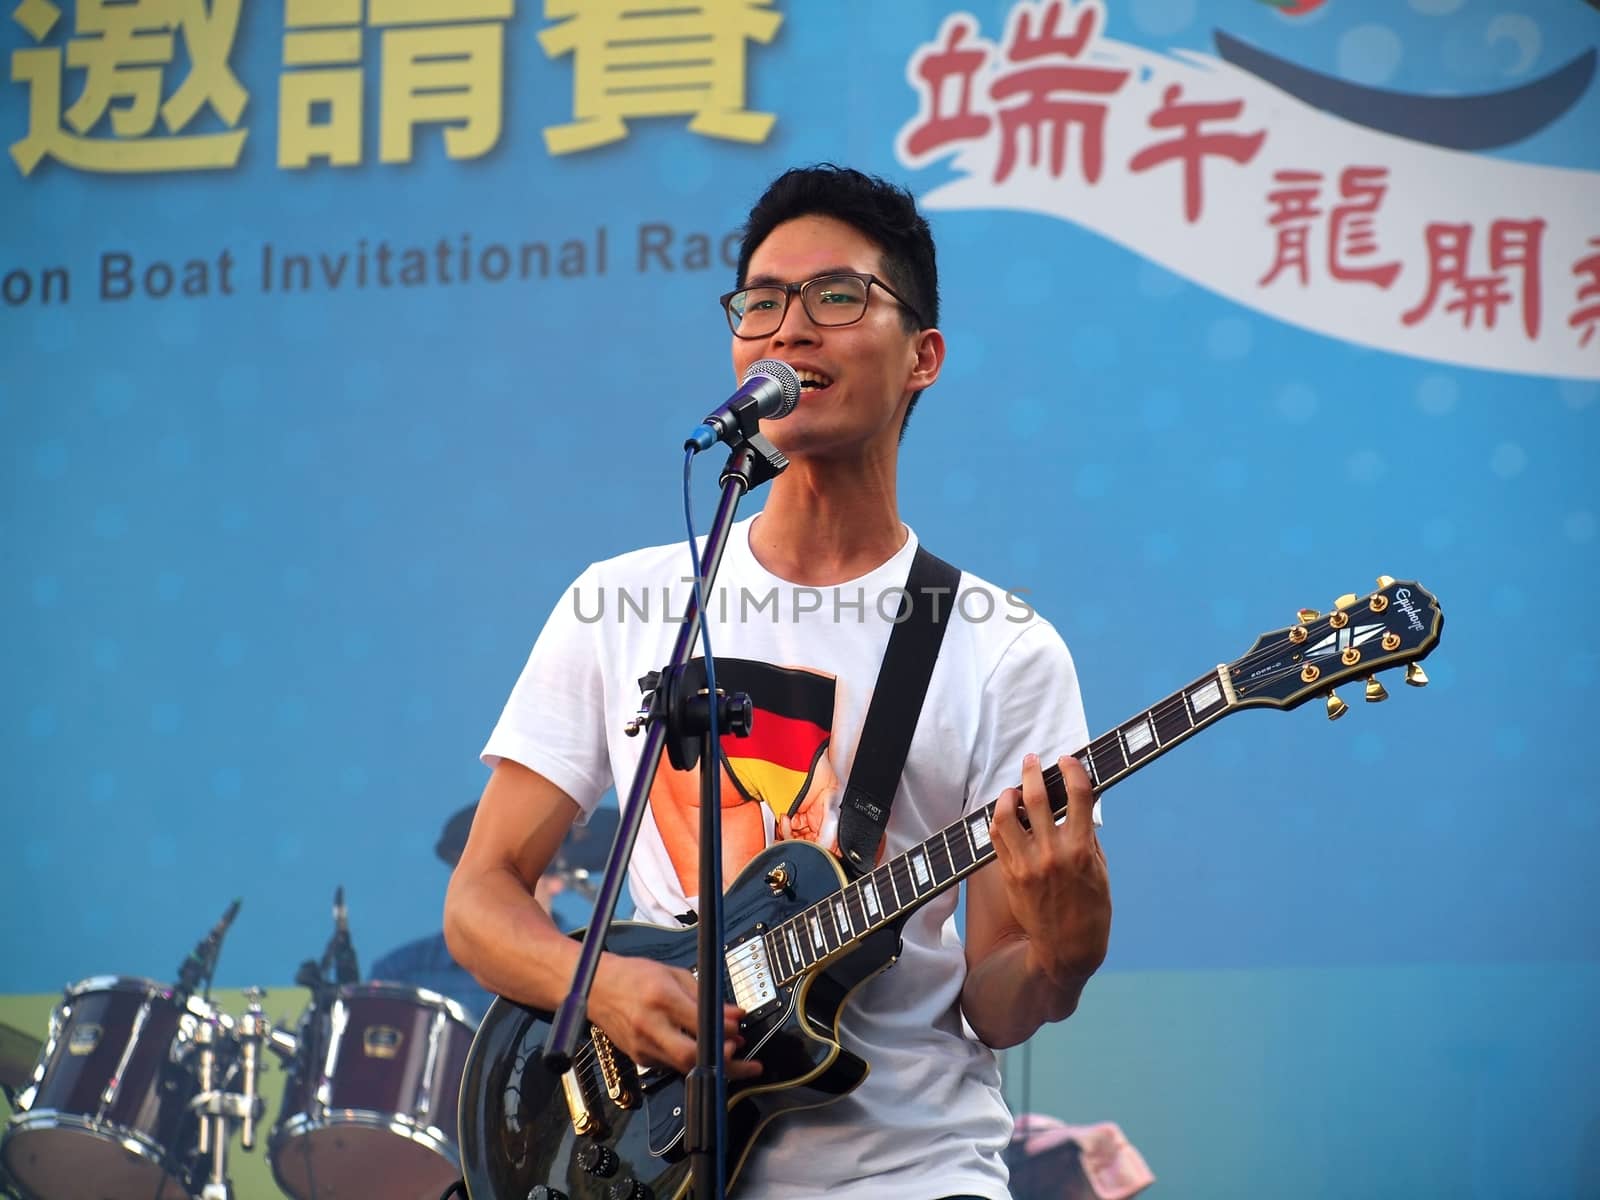 KAOHSIUNG, TAIWAN - JUNE 23: Local pop group Fleabags entertains visitors to the 2012 Dragon Boat Festival along the Love River on June 23, 2012 in Kaohsiung